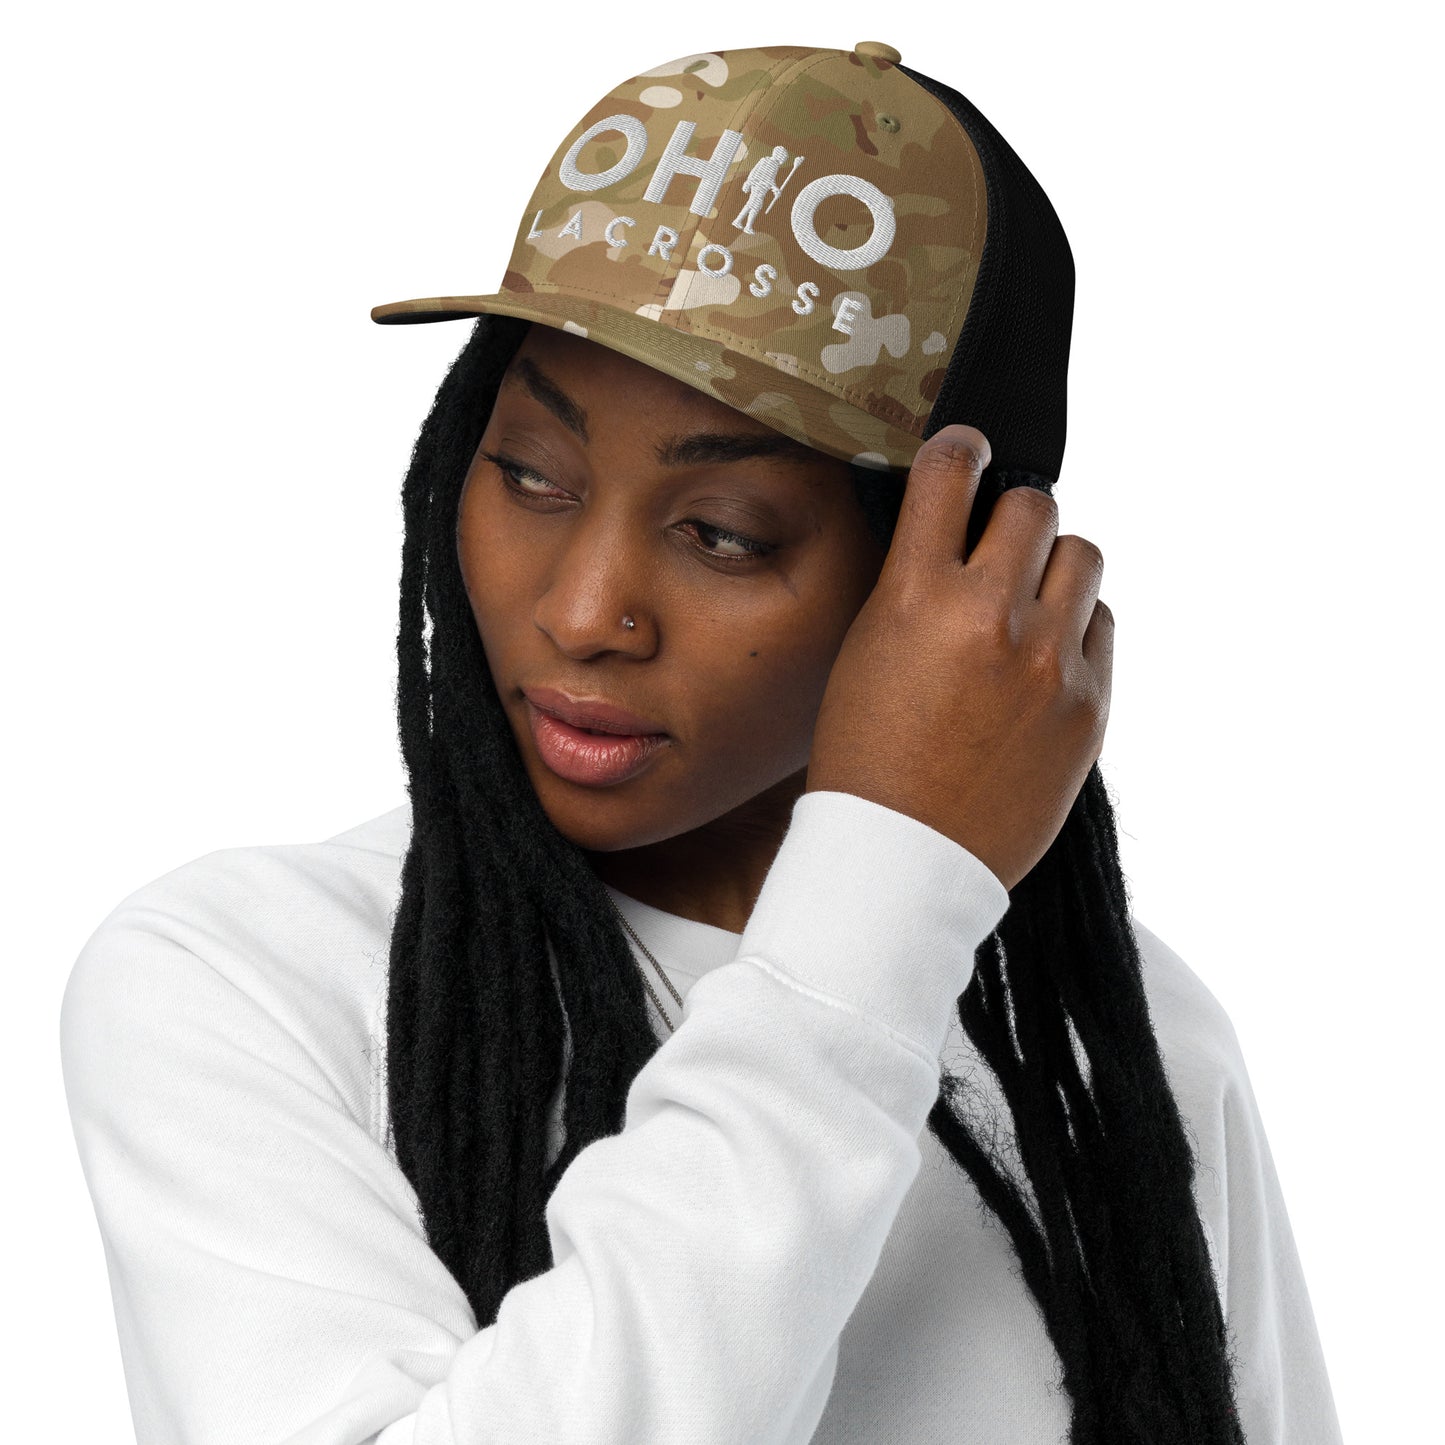 OH LACROSSE (Player substitution)-Closed-back trucker cap